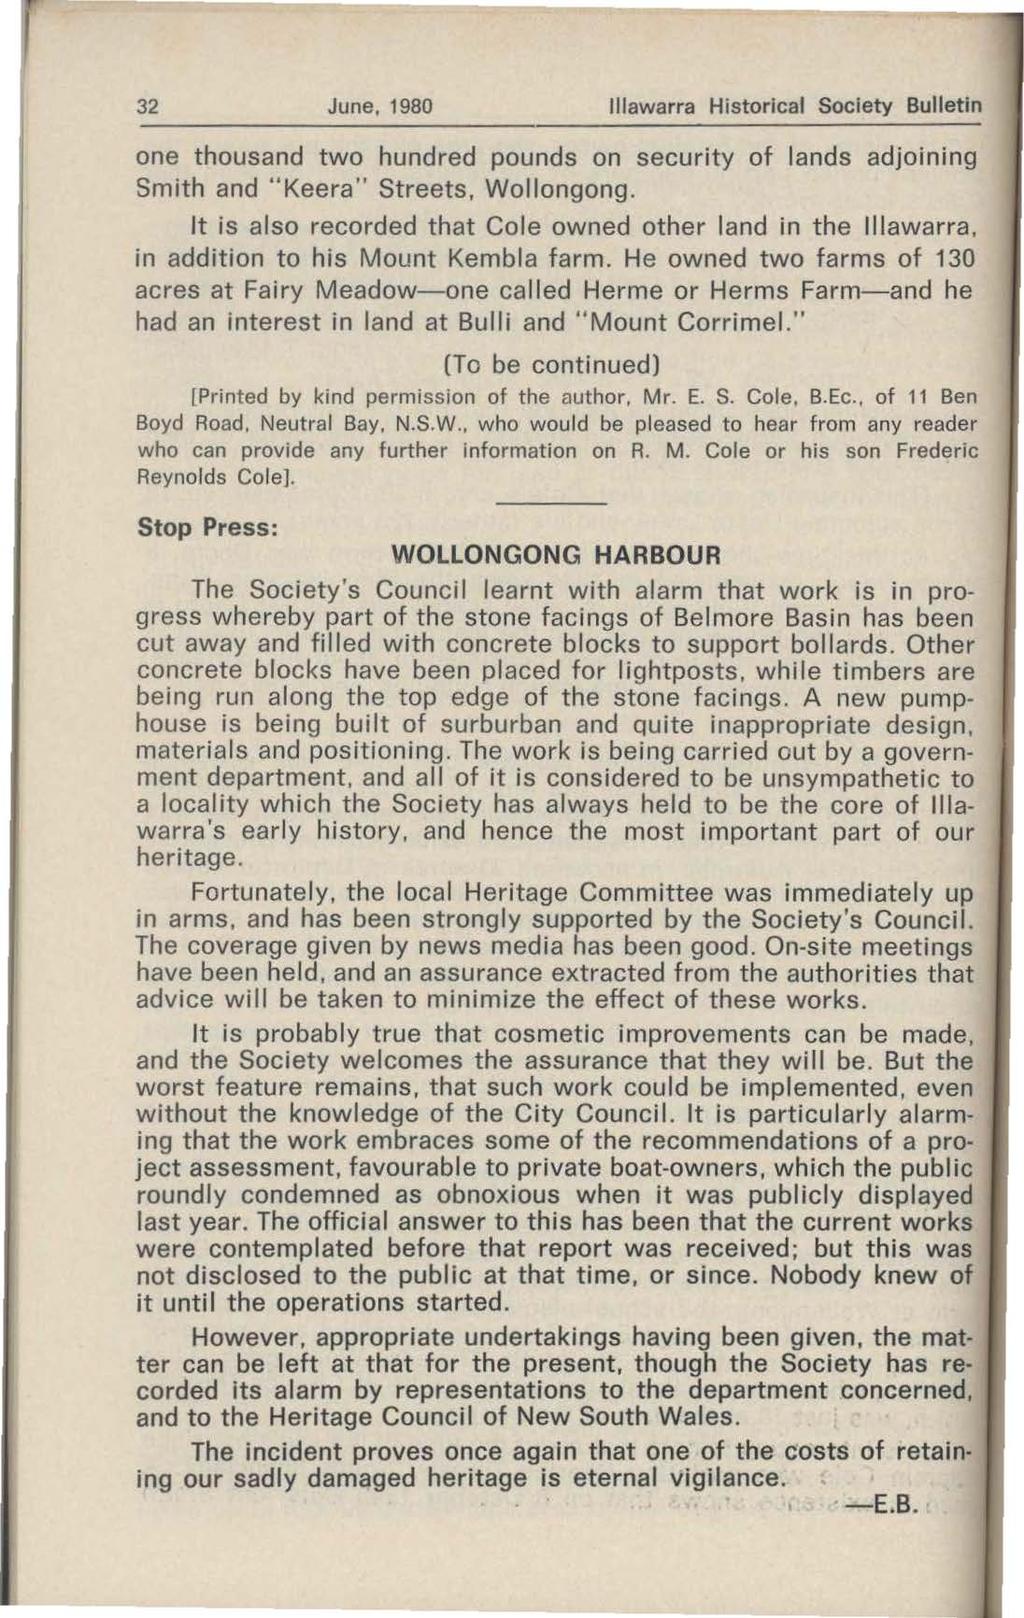 32 June, 1980 lllawarra Historical Society Bulletin one thousand two hundred pounds on security of lands adjoining Smith and "Keera" Streets, Wollongong.